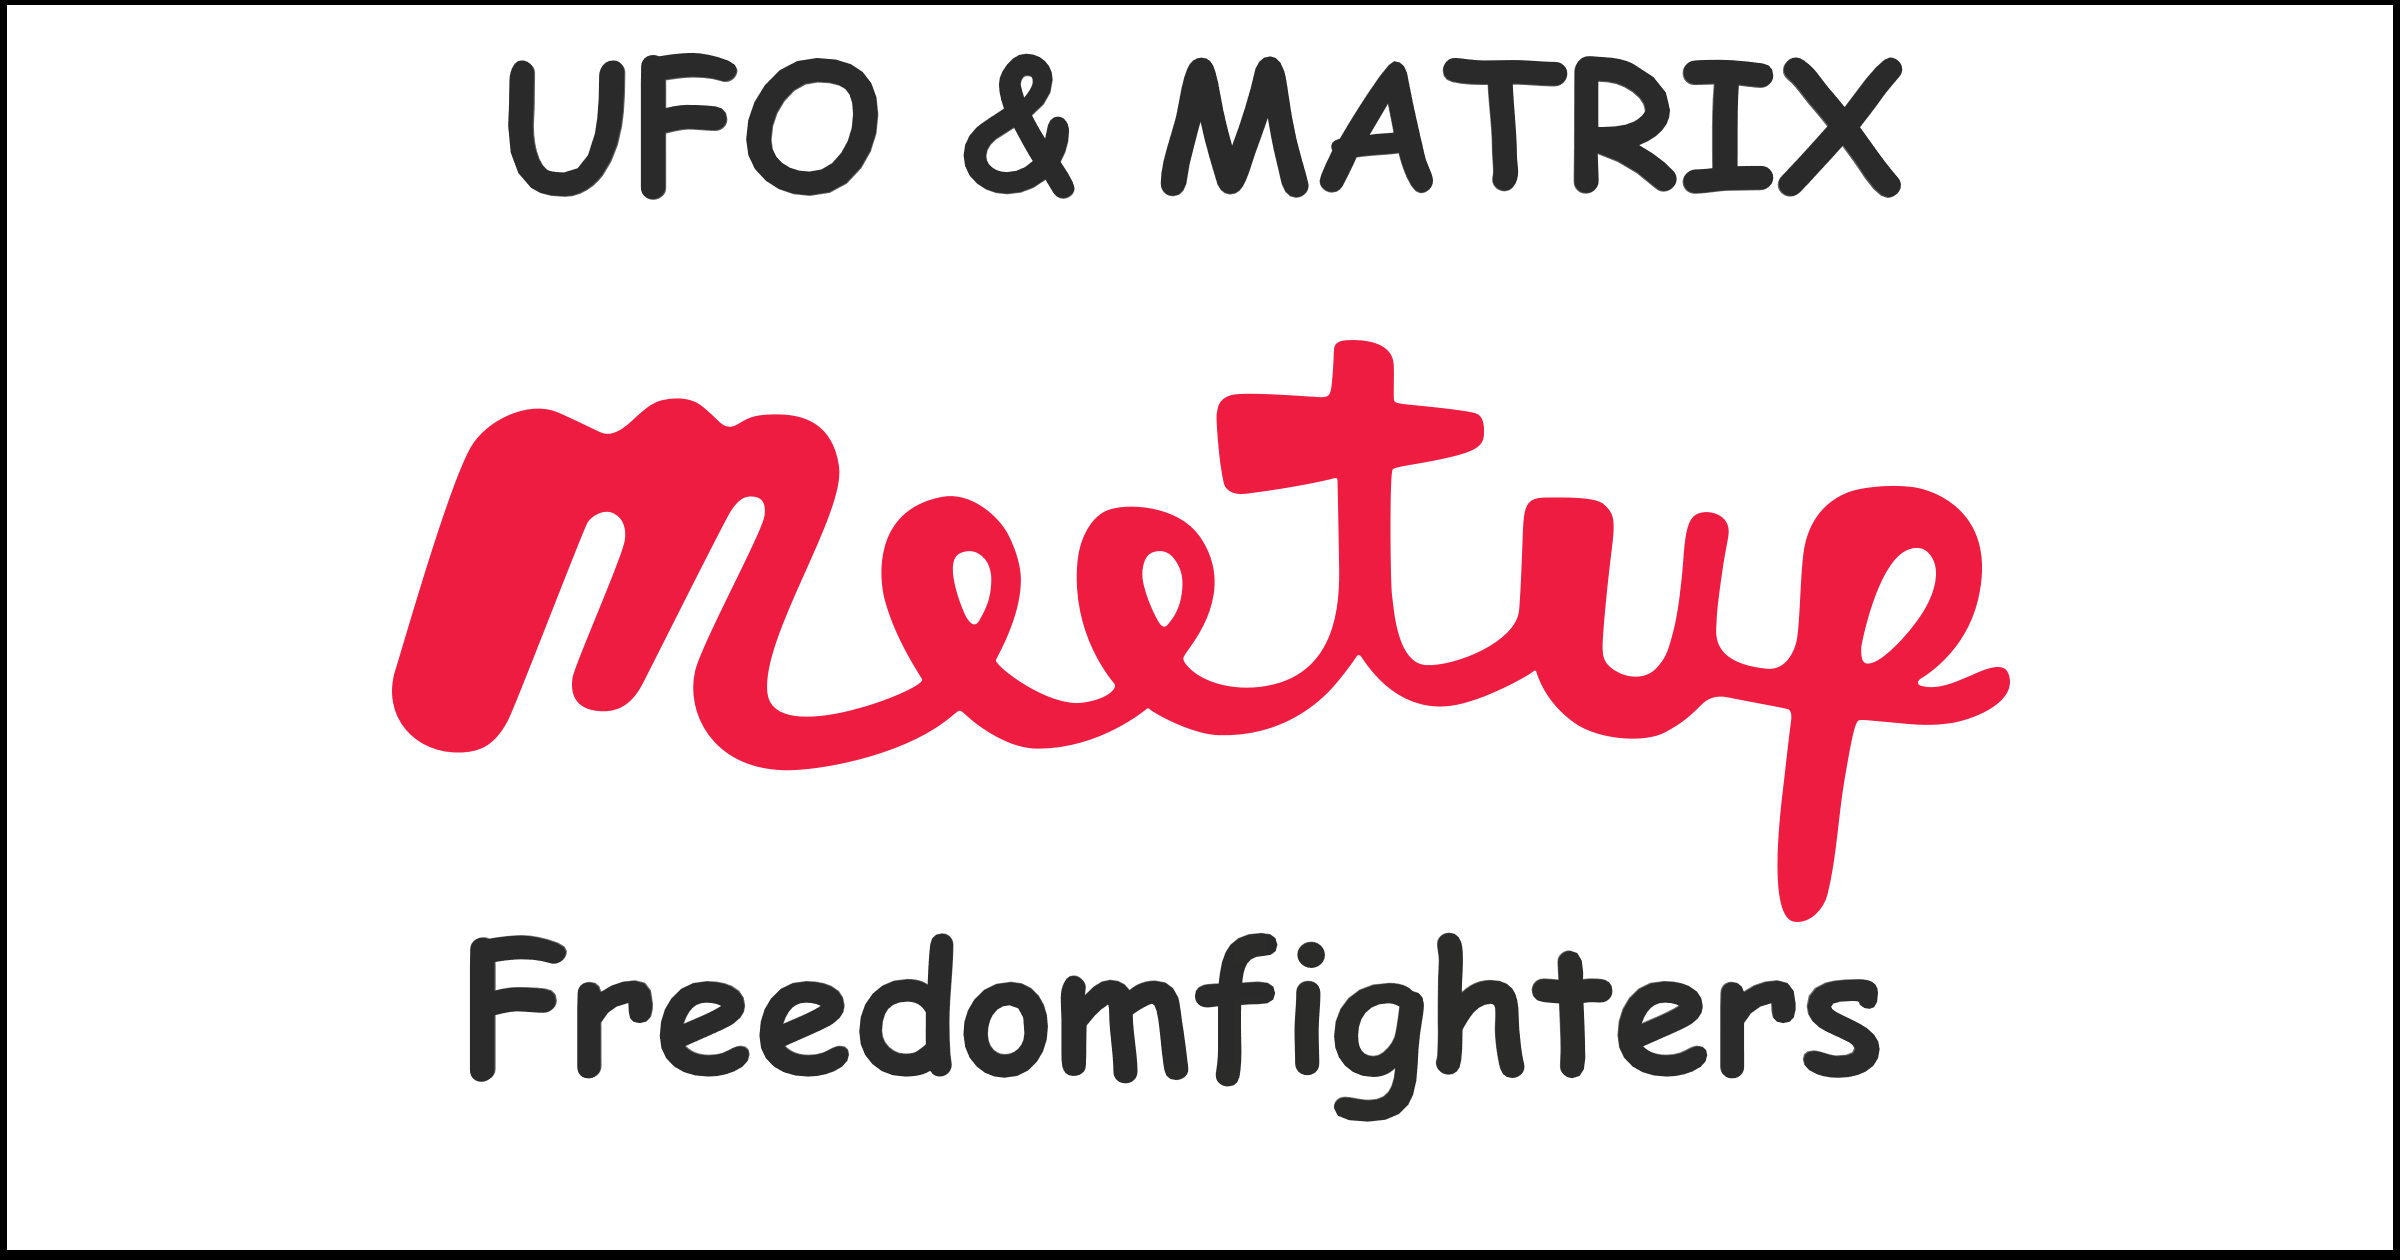 UFO meetup group about matrix and associated issues